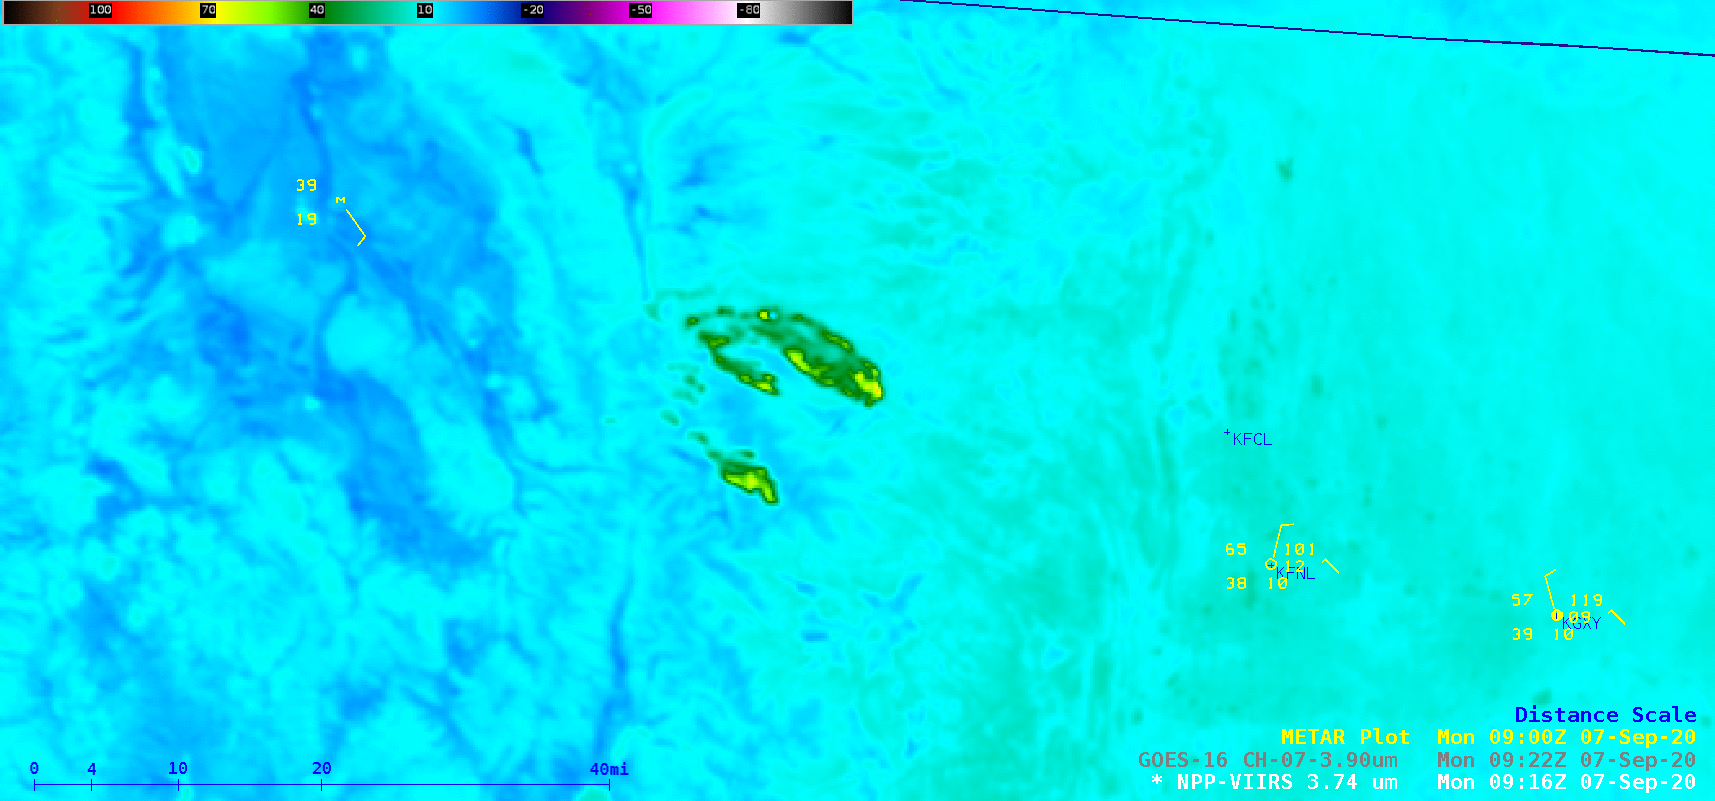 Shortwave Infrared images from Suomi NPP (3.74 µm) and GOES-16 (3.9 µm), with plots of METAR surface reports [click to enlarge]